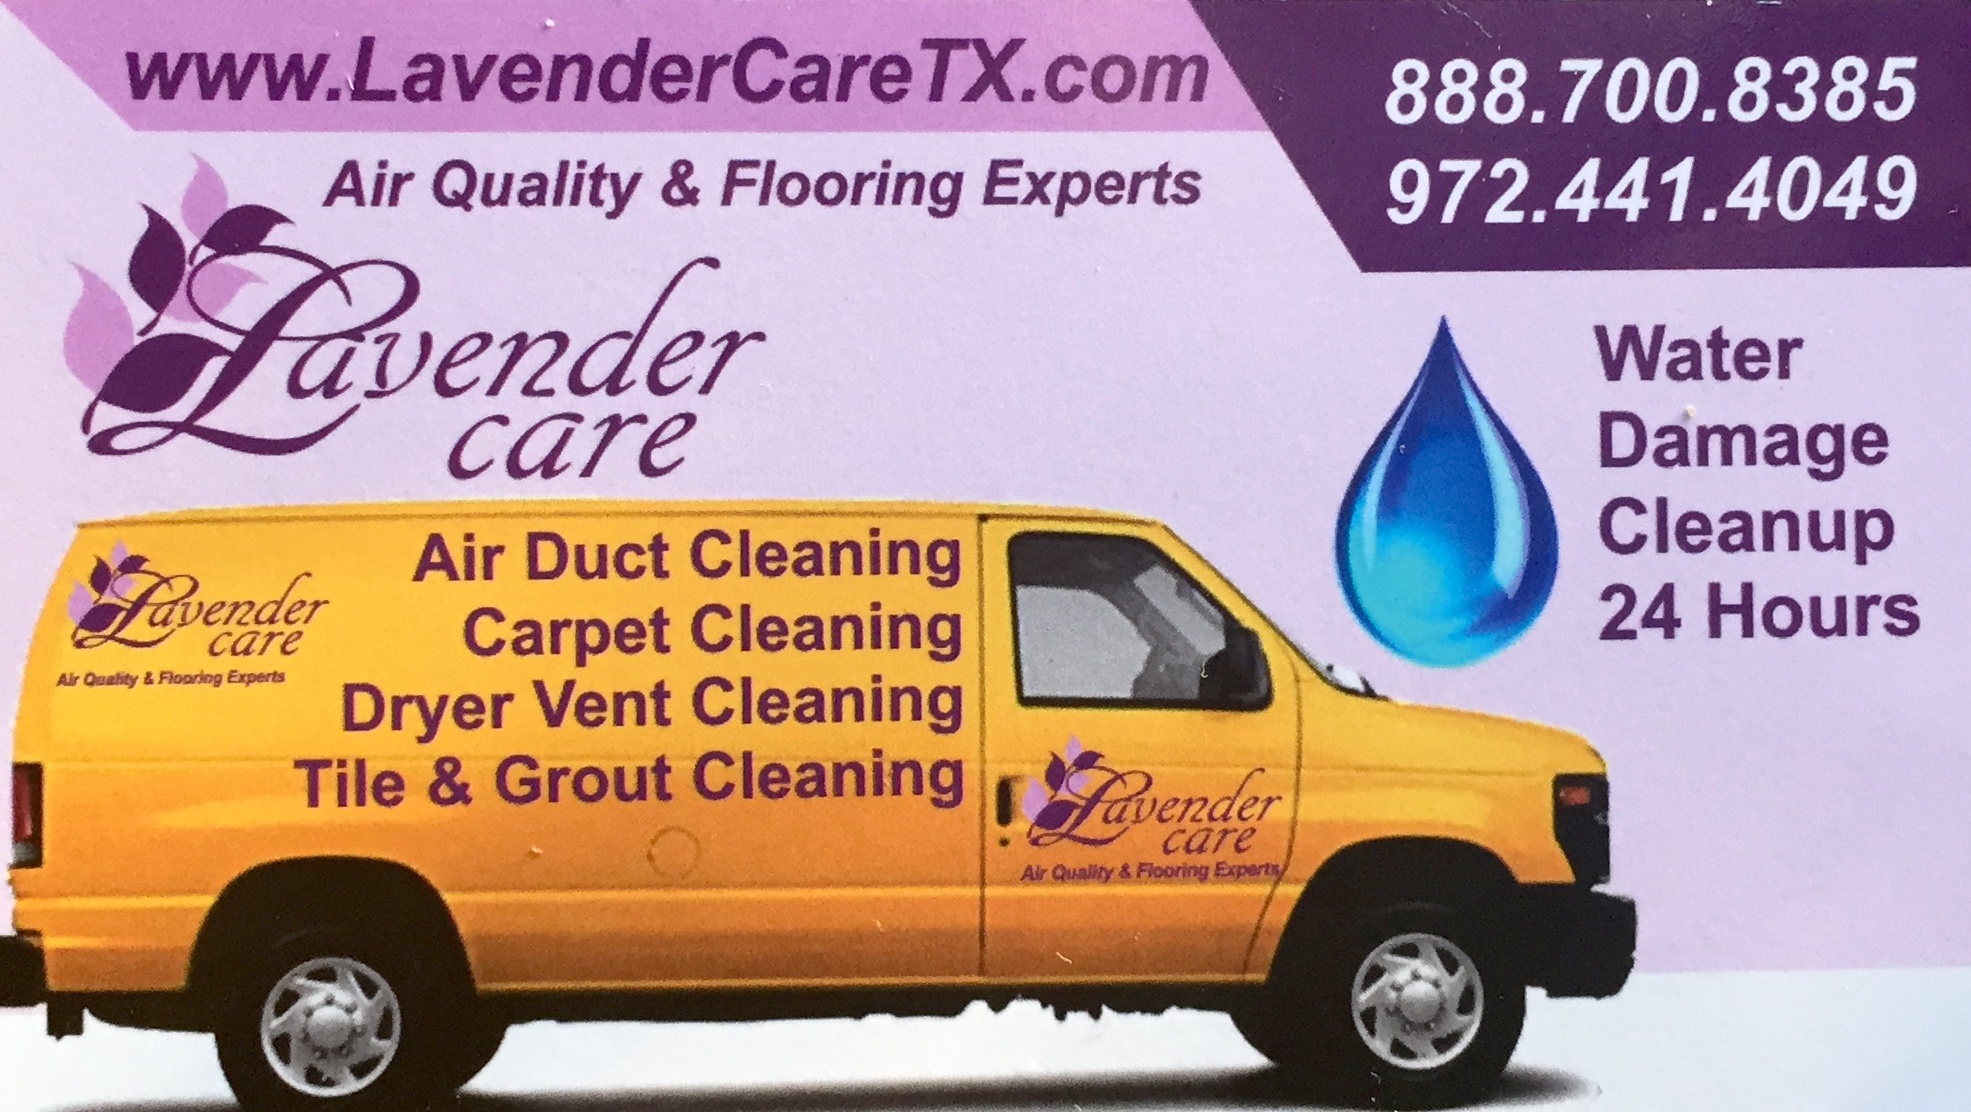 dryer vent cleaning companies near me